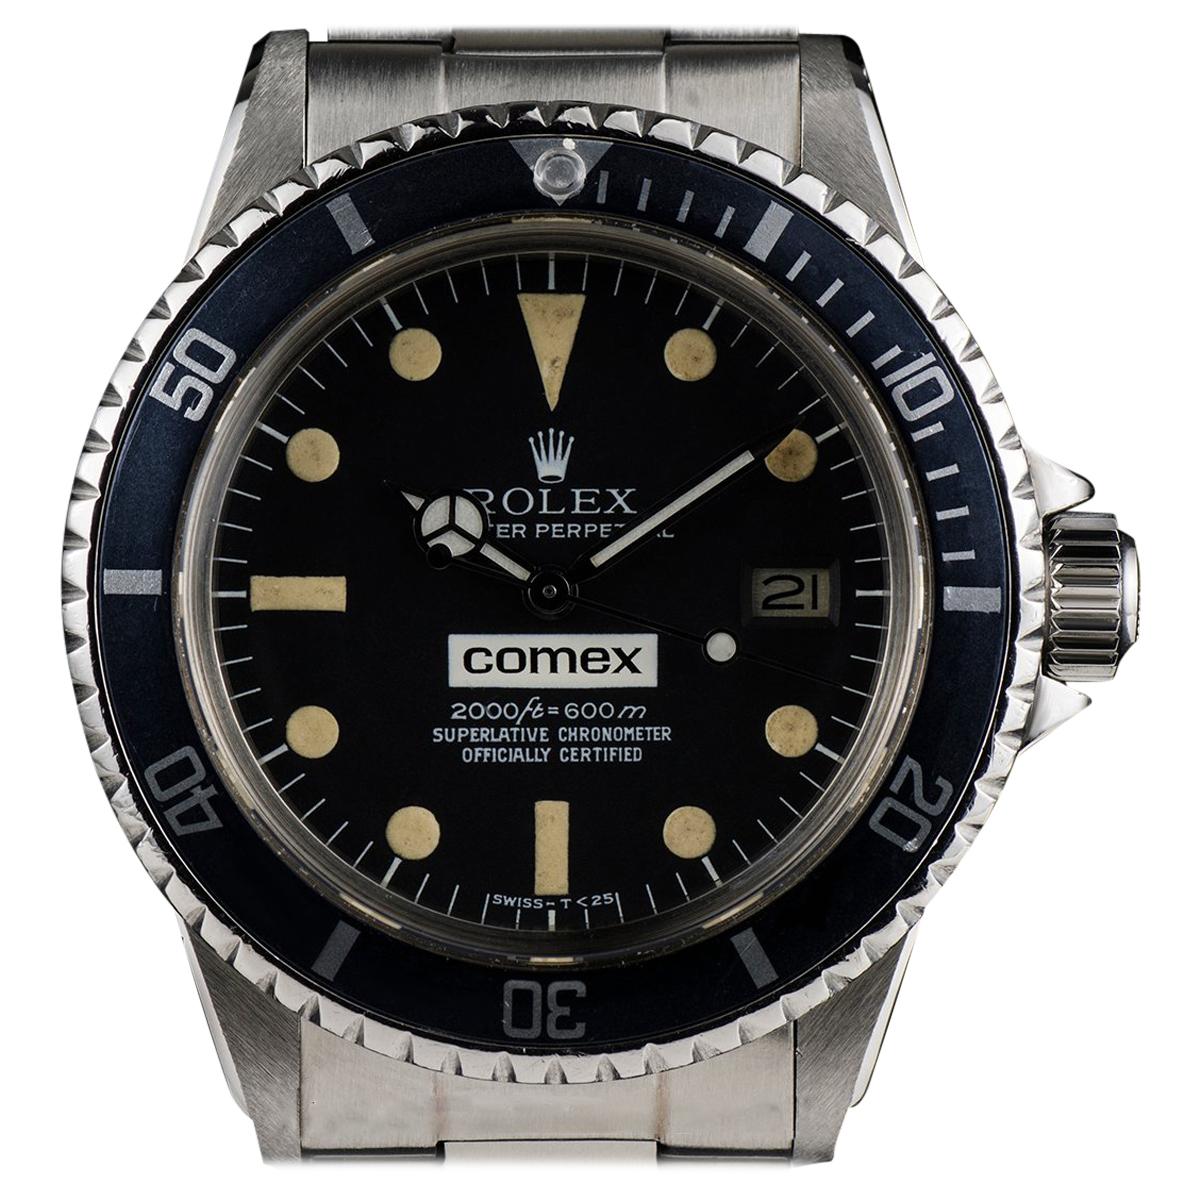 Rolex Comex Sea-Dweller Gents Stainless Steel Black Dial 1665 Automatic Watch